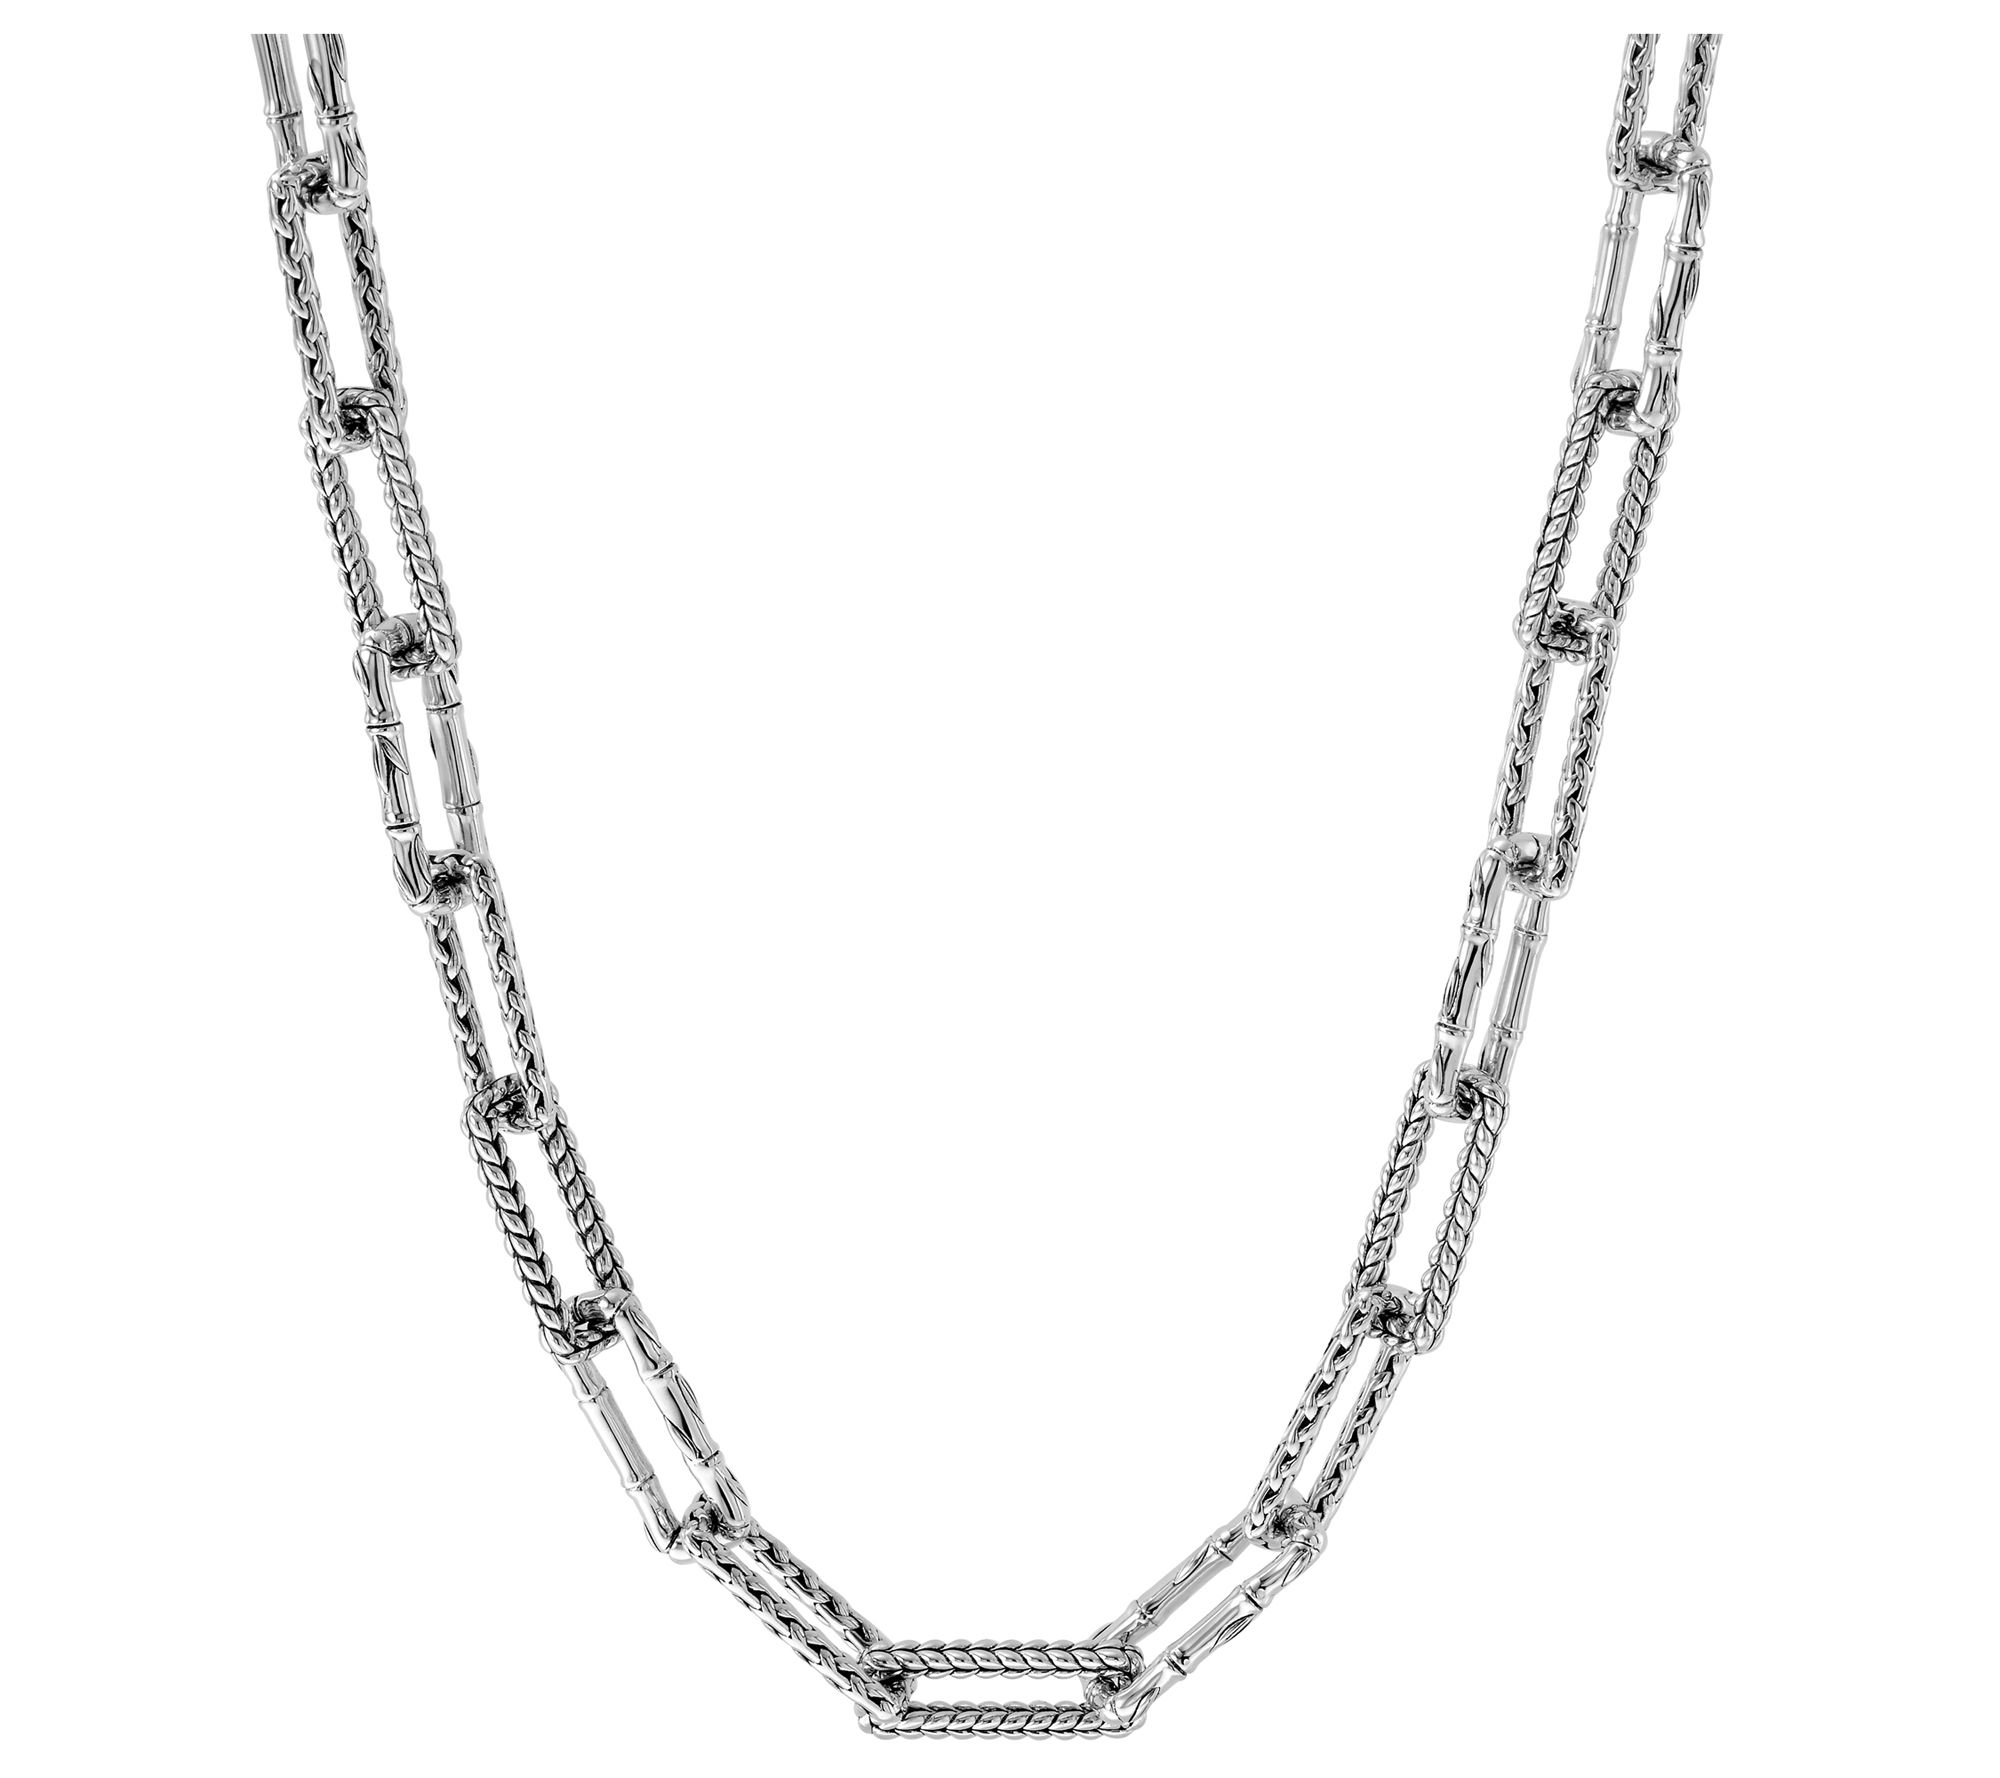 JAI Sterling Silver Global Textures Paperclip Necklace, 34.0g - QVC.com